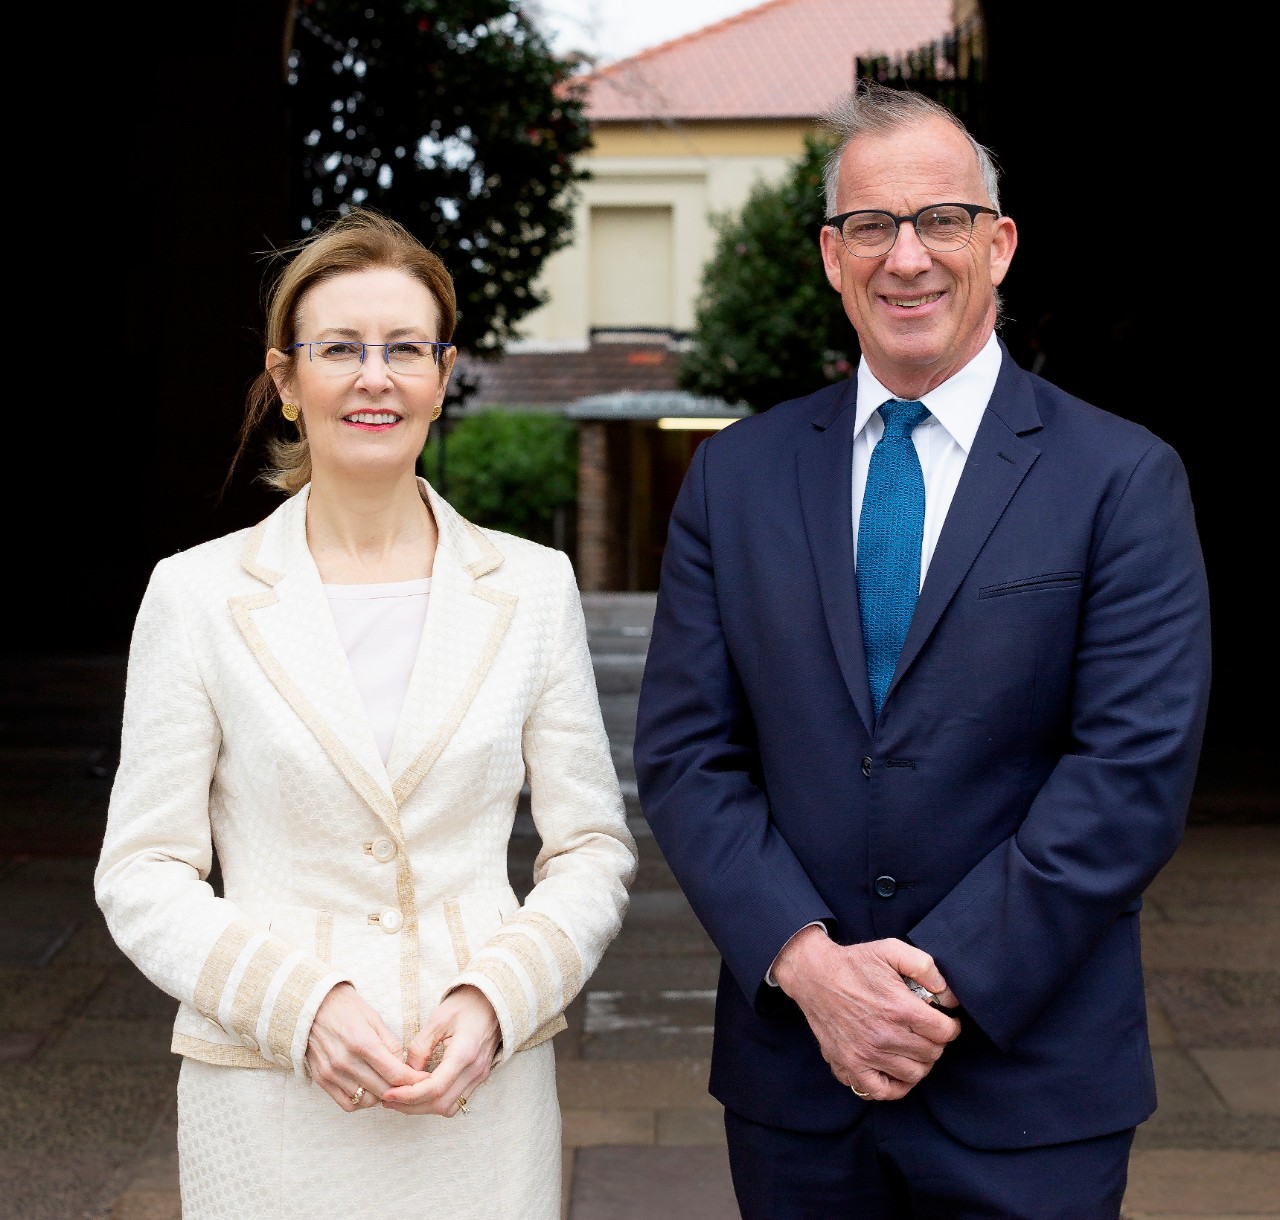 NSW Heritage Minister Gabrielle Upton with Vice-Chancellor and Principal Dr Michael Spence